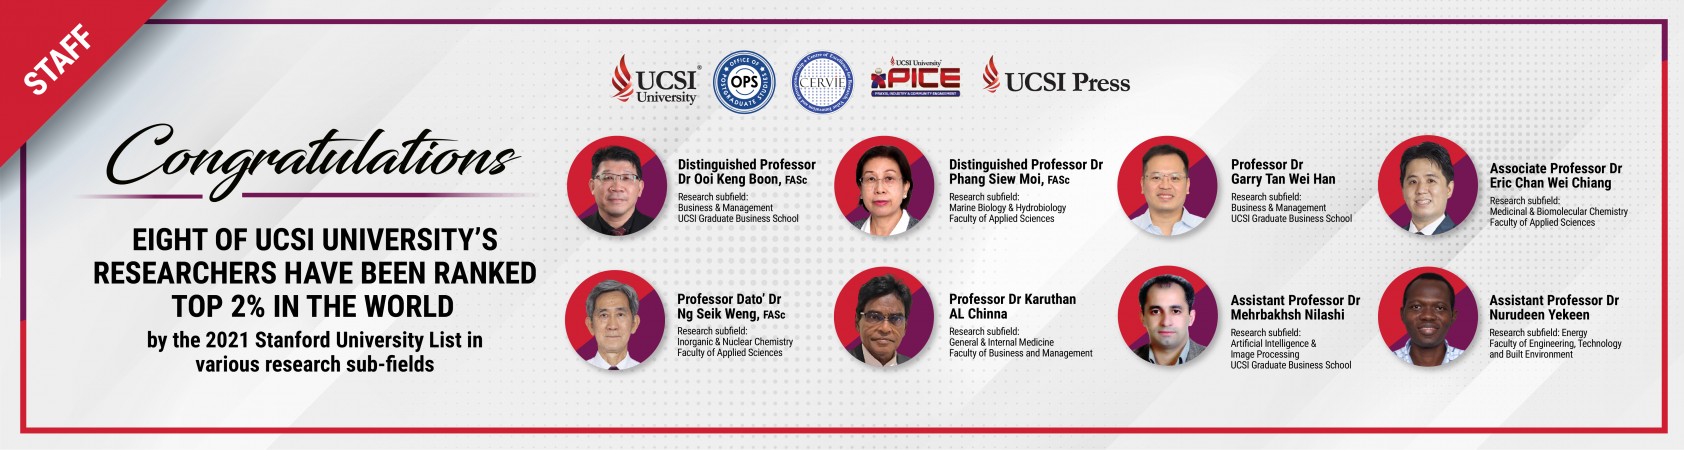 Congratulations to Eight of UCSI University's Researchers for Being Ranked Top 2% in the World!